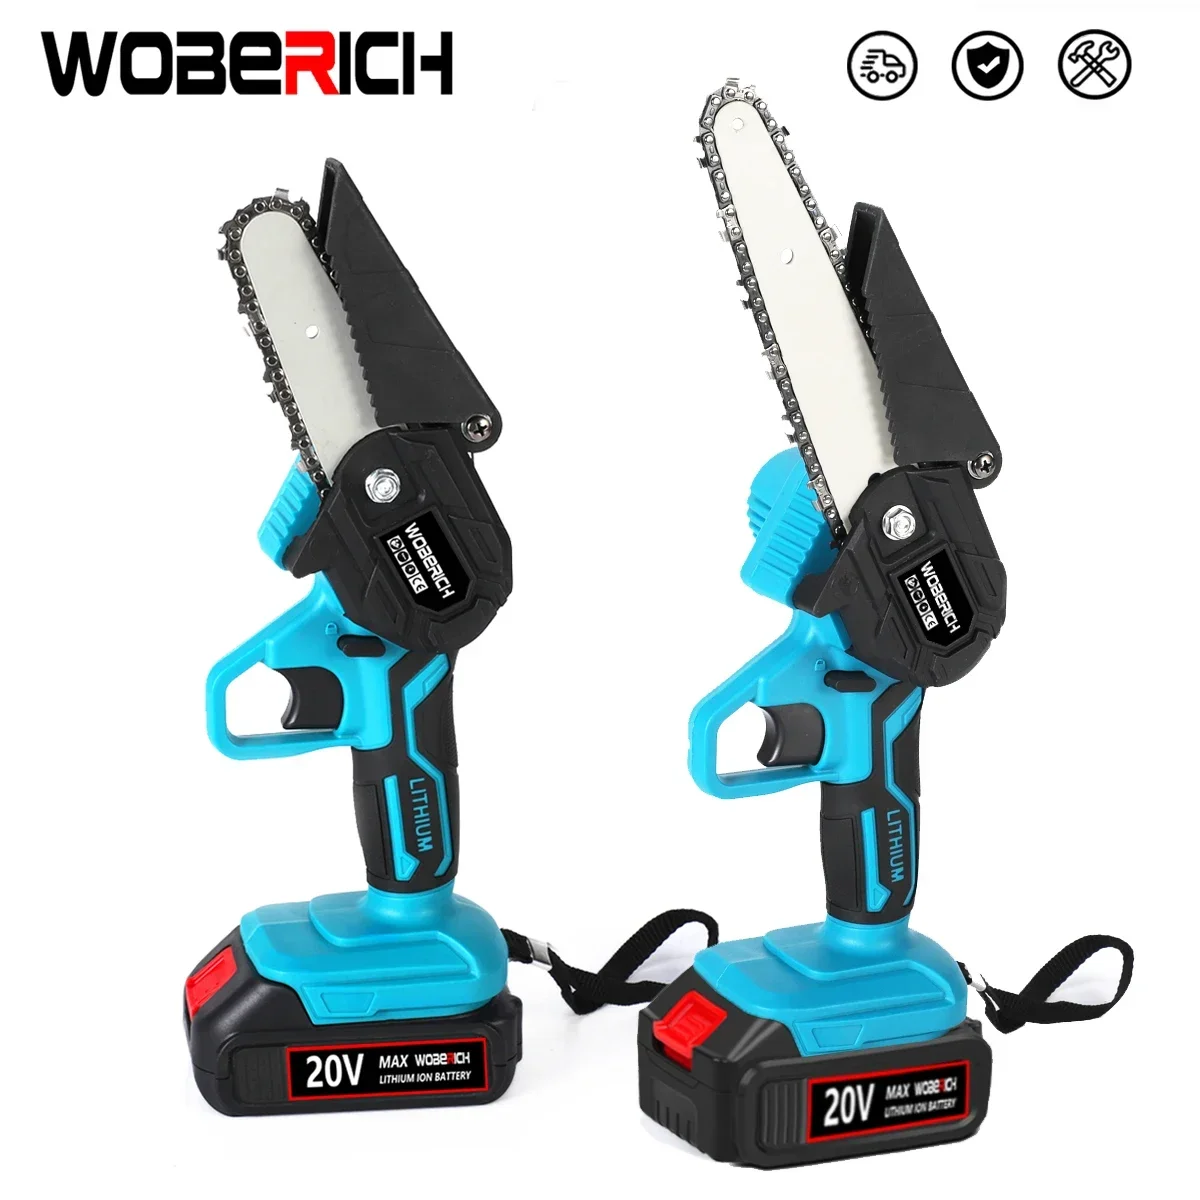 6 inch electric mini chain saws pruning chainsaw cordless garden tree logging trimming saw wood cutting for makita by woberich 4inch/6inch Electric Mini Chain Saws Pruning ChainSaw Cordless Garden Tree Logging Trimming Saw Wood Cutting  For Makita 18V